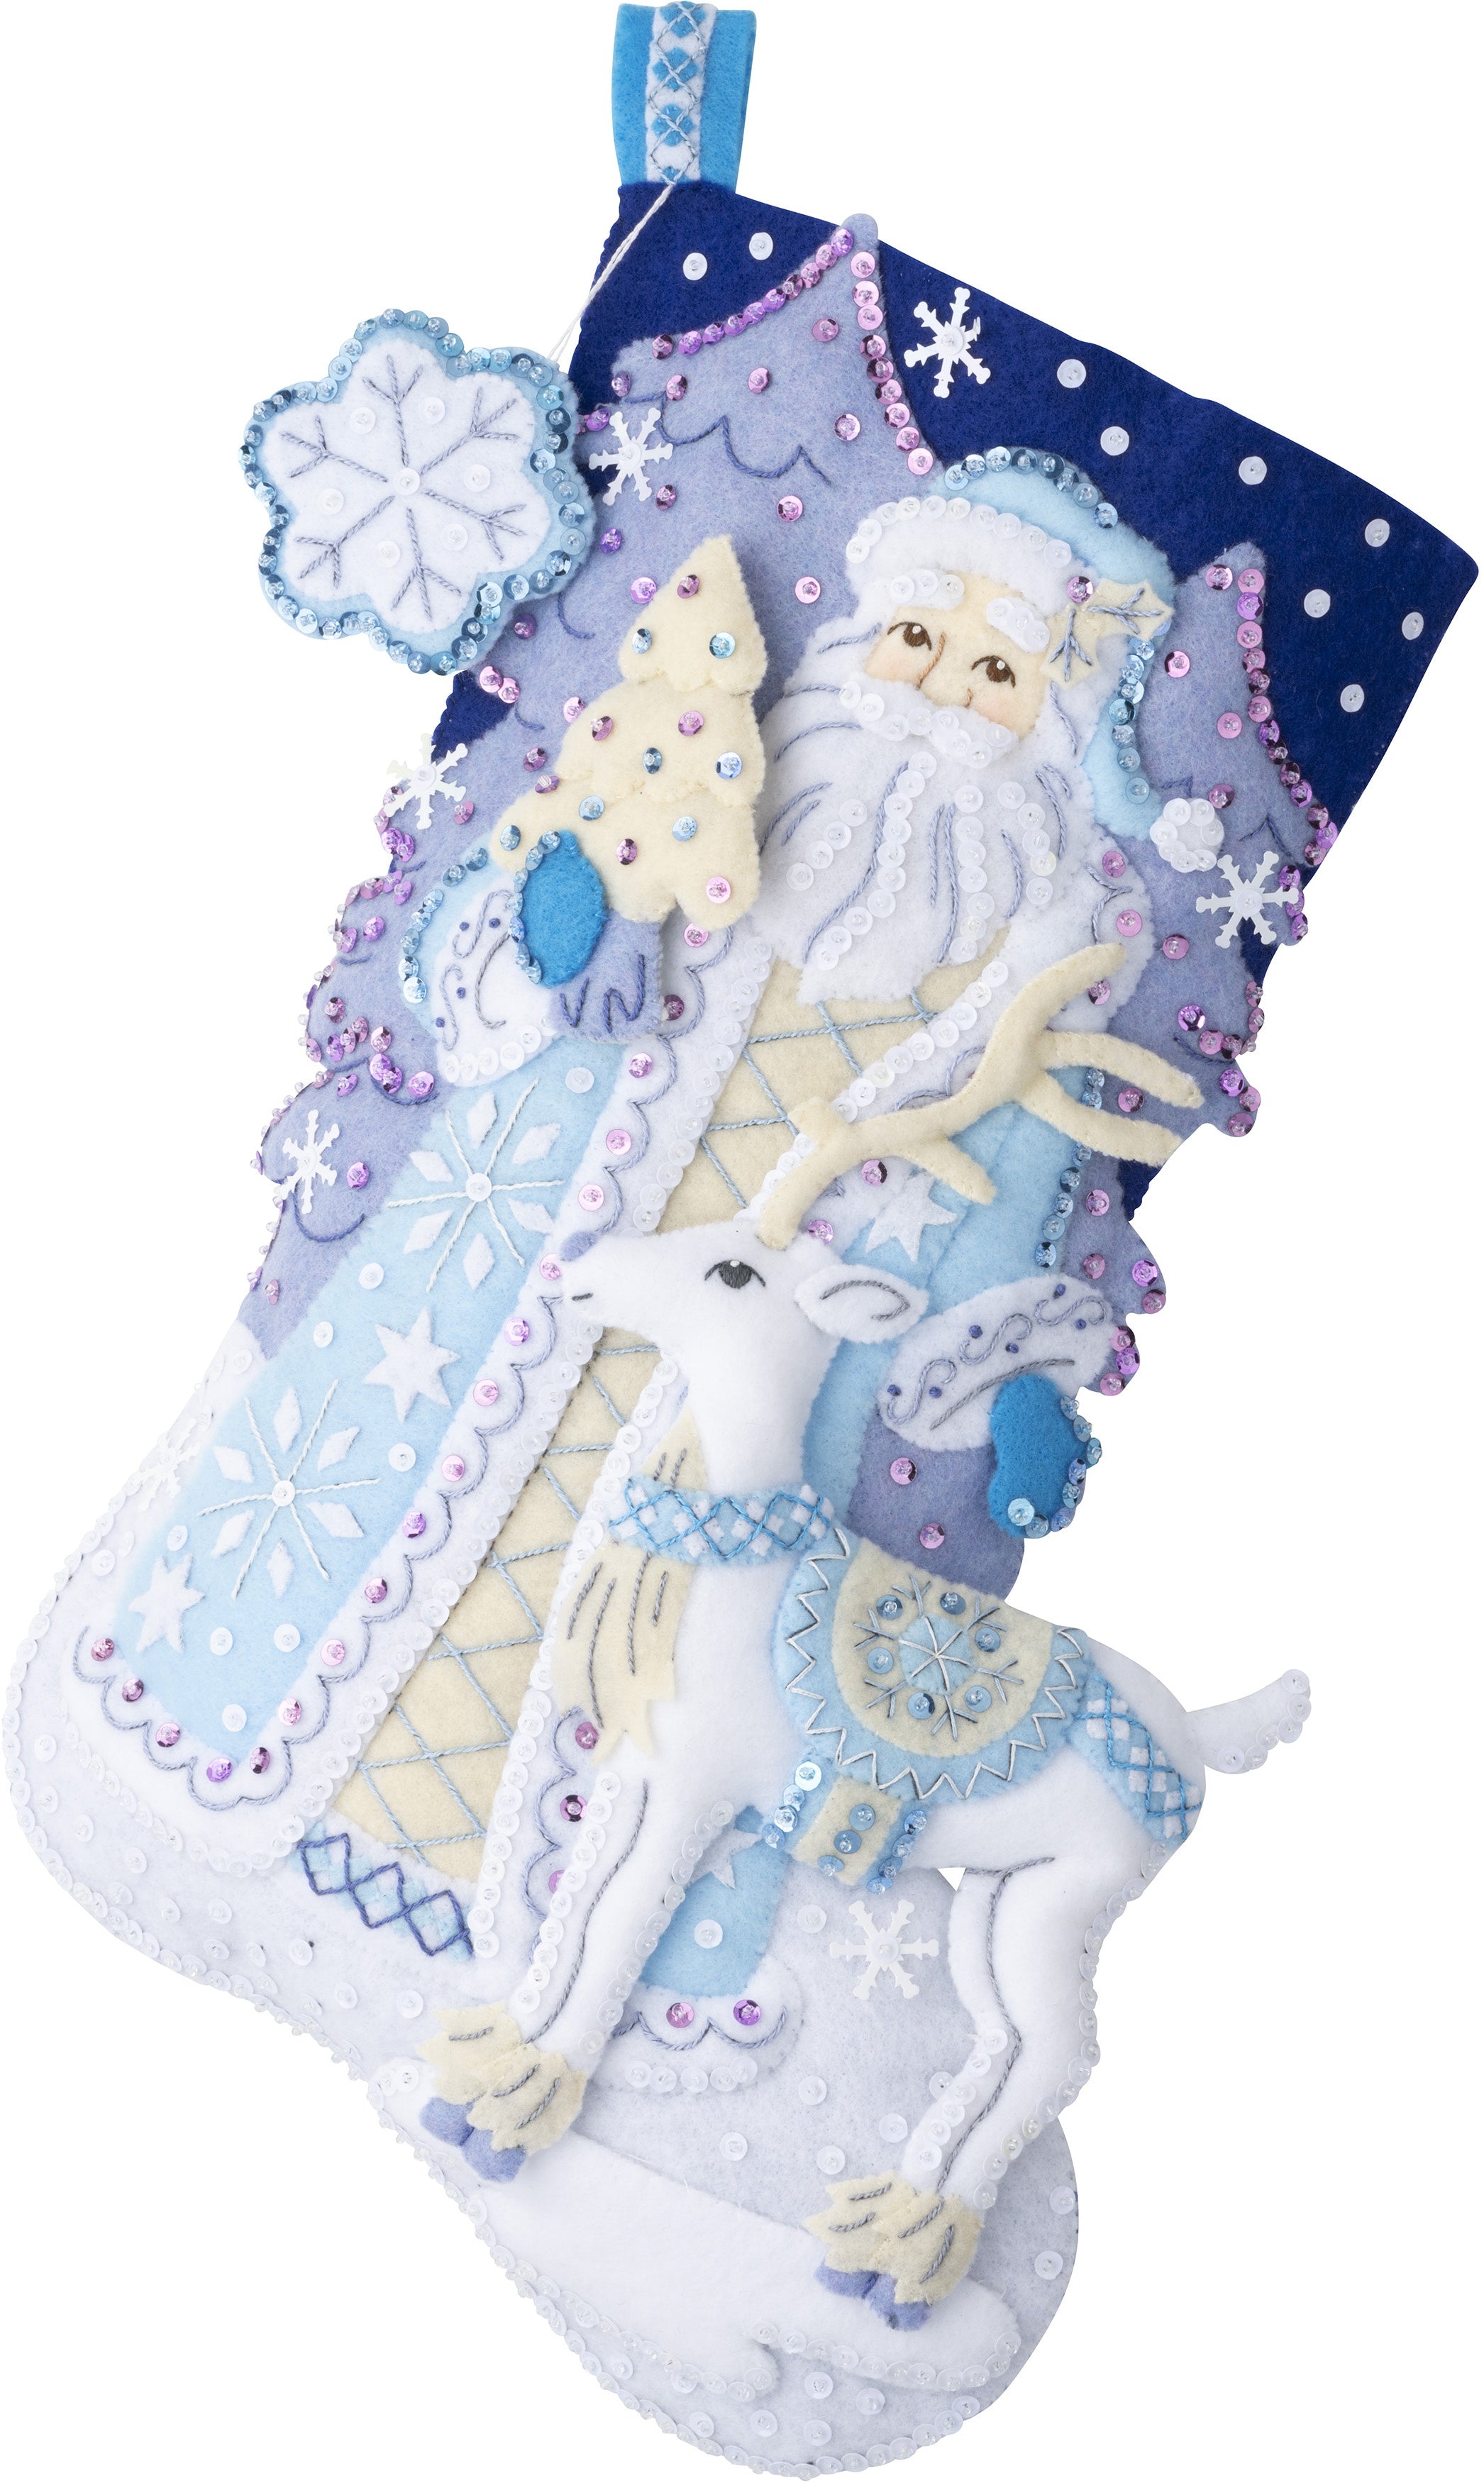 Bucilla felt christmas stocking kit. Design features a santa dressed in light blue and cream next to a white deer. The background features light purple trees. Blues and Purples are predominant in this stocking.